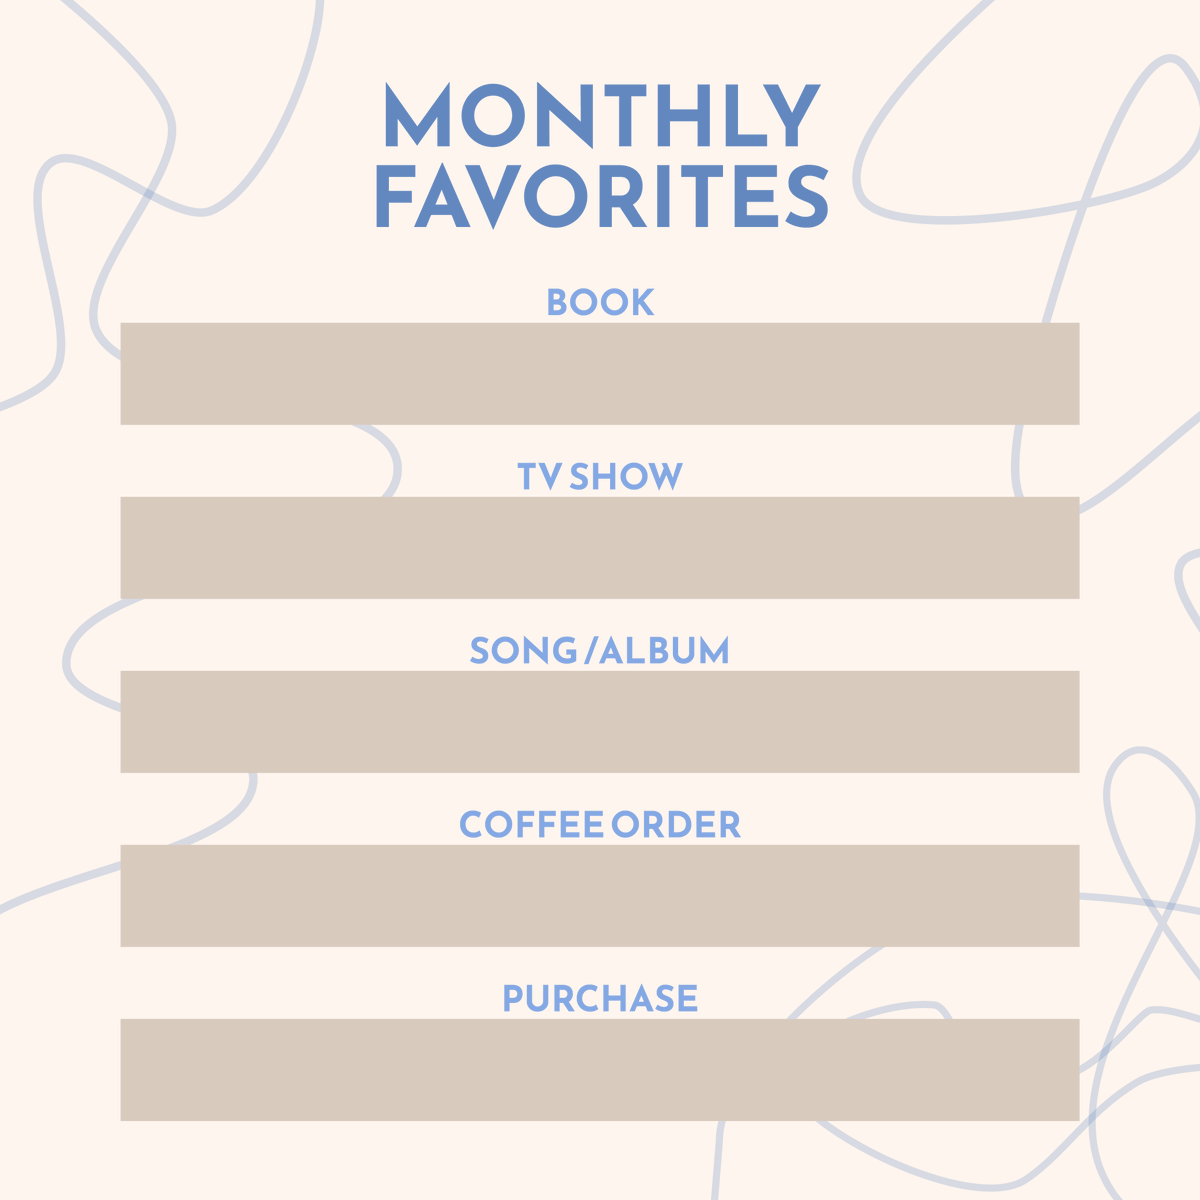 What are a few things you've been loving this month? #MonthlyFavorites